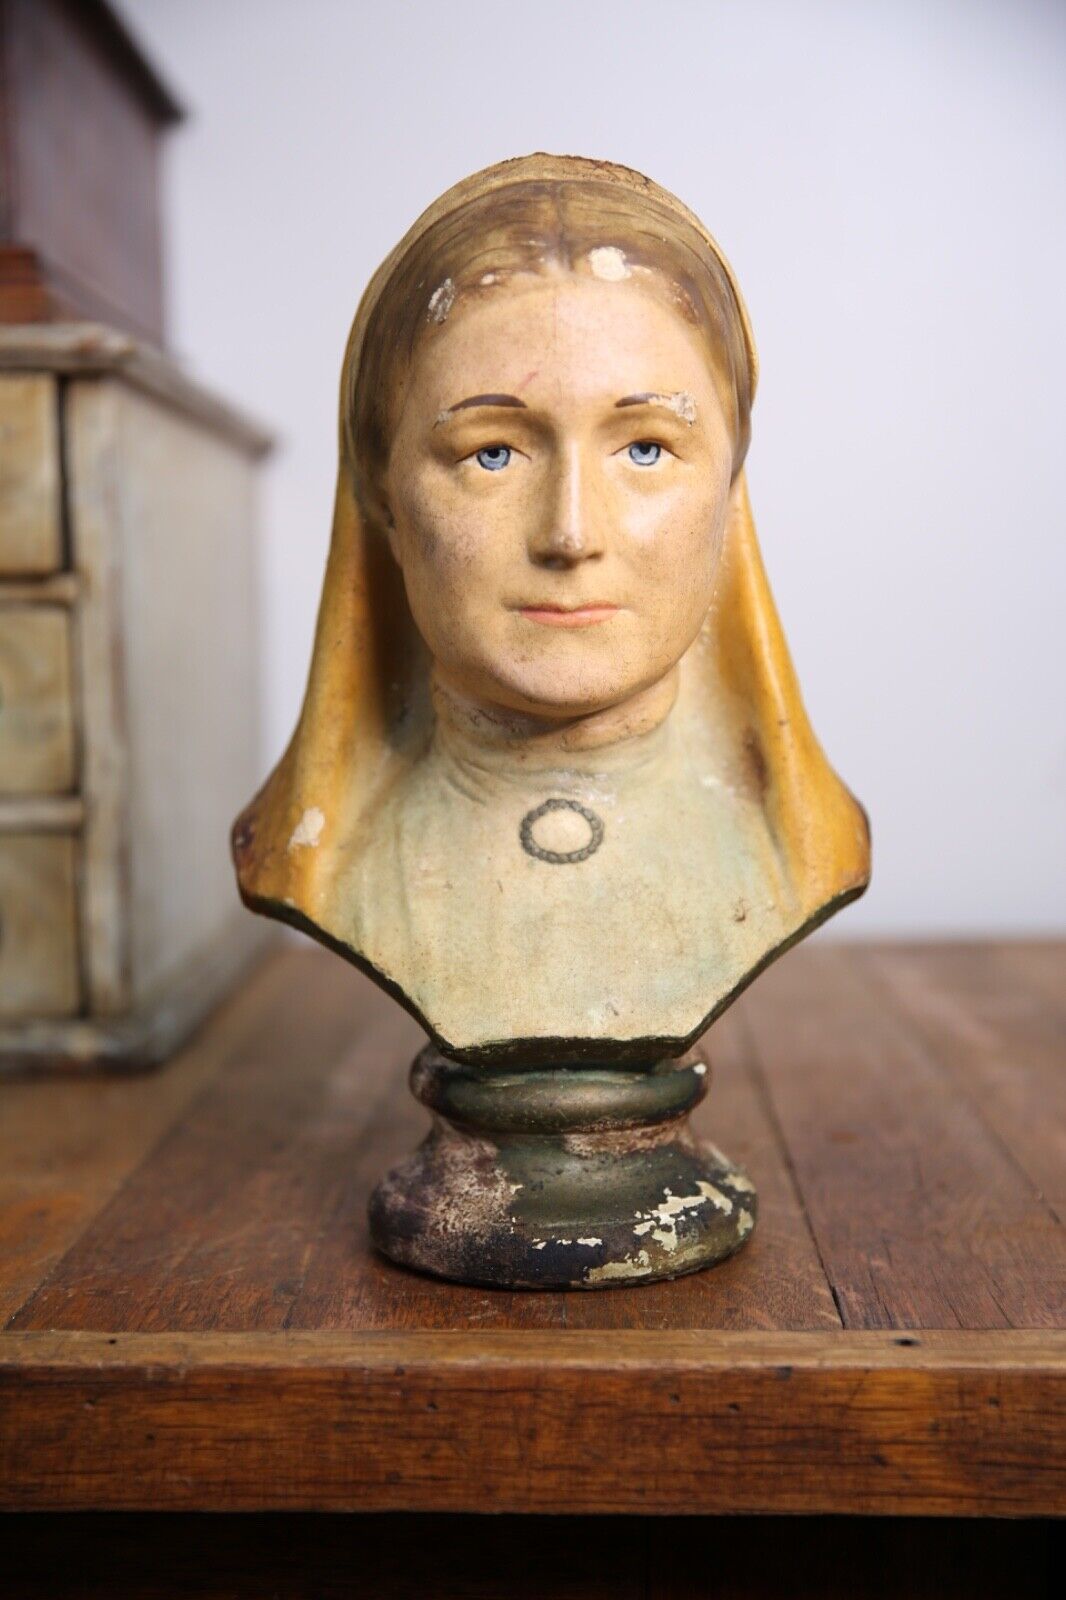 Vintage Antique Chalkware Head Bust Counter Display Religious woman statue old